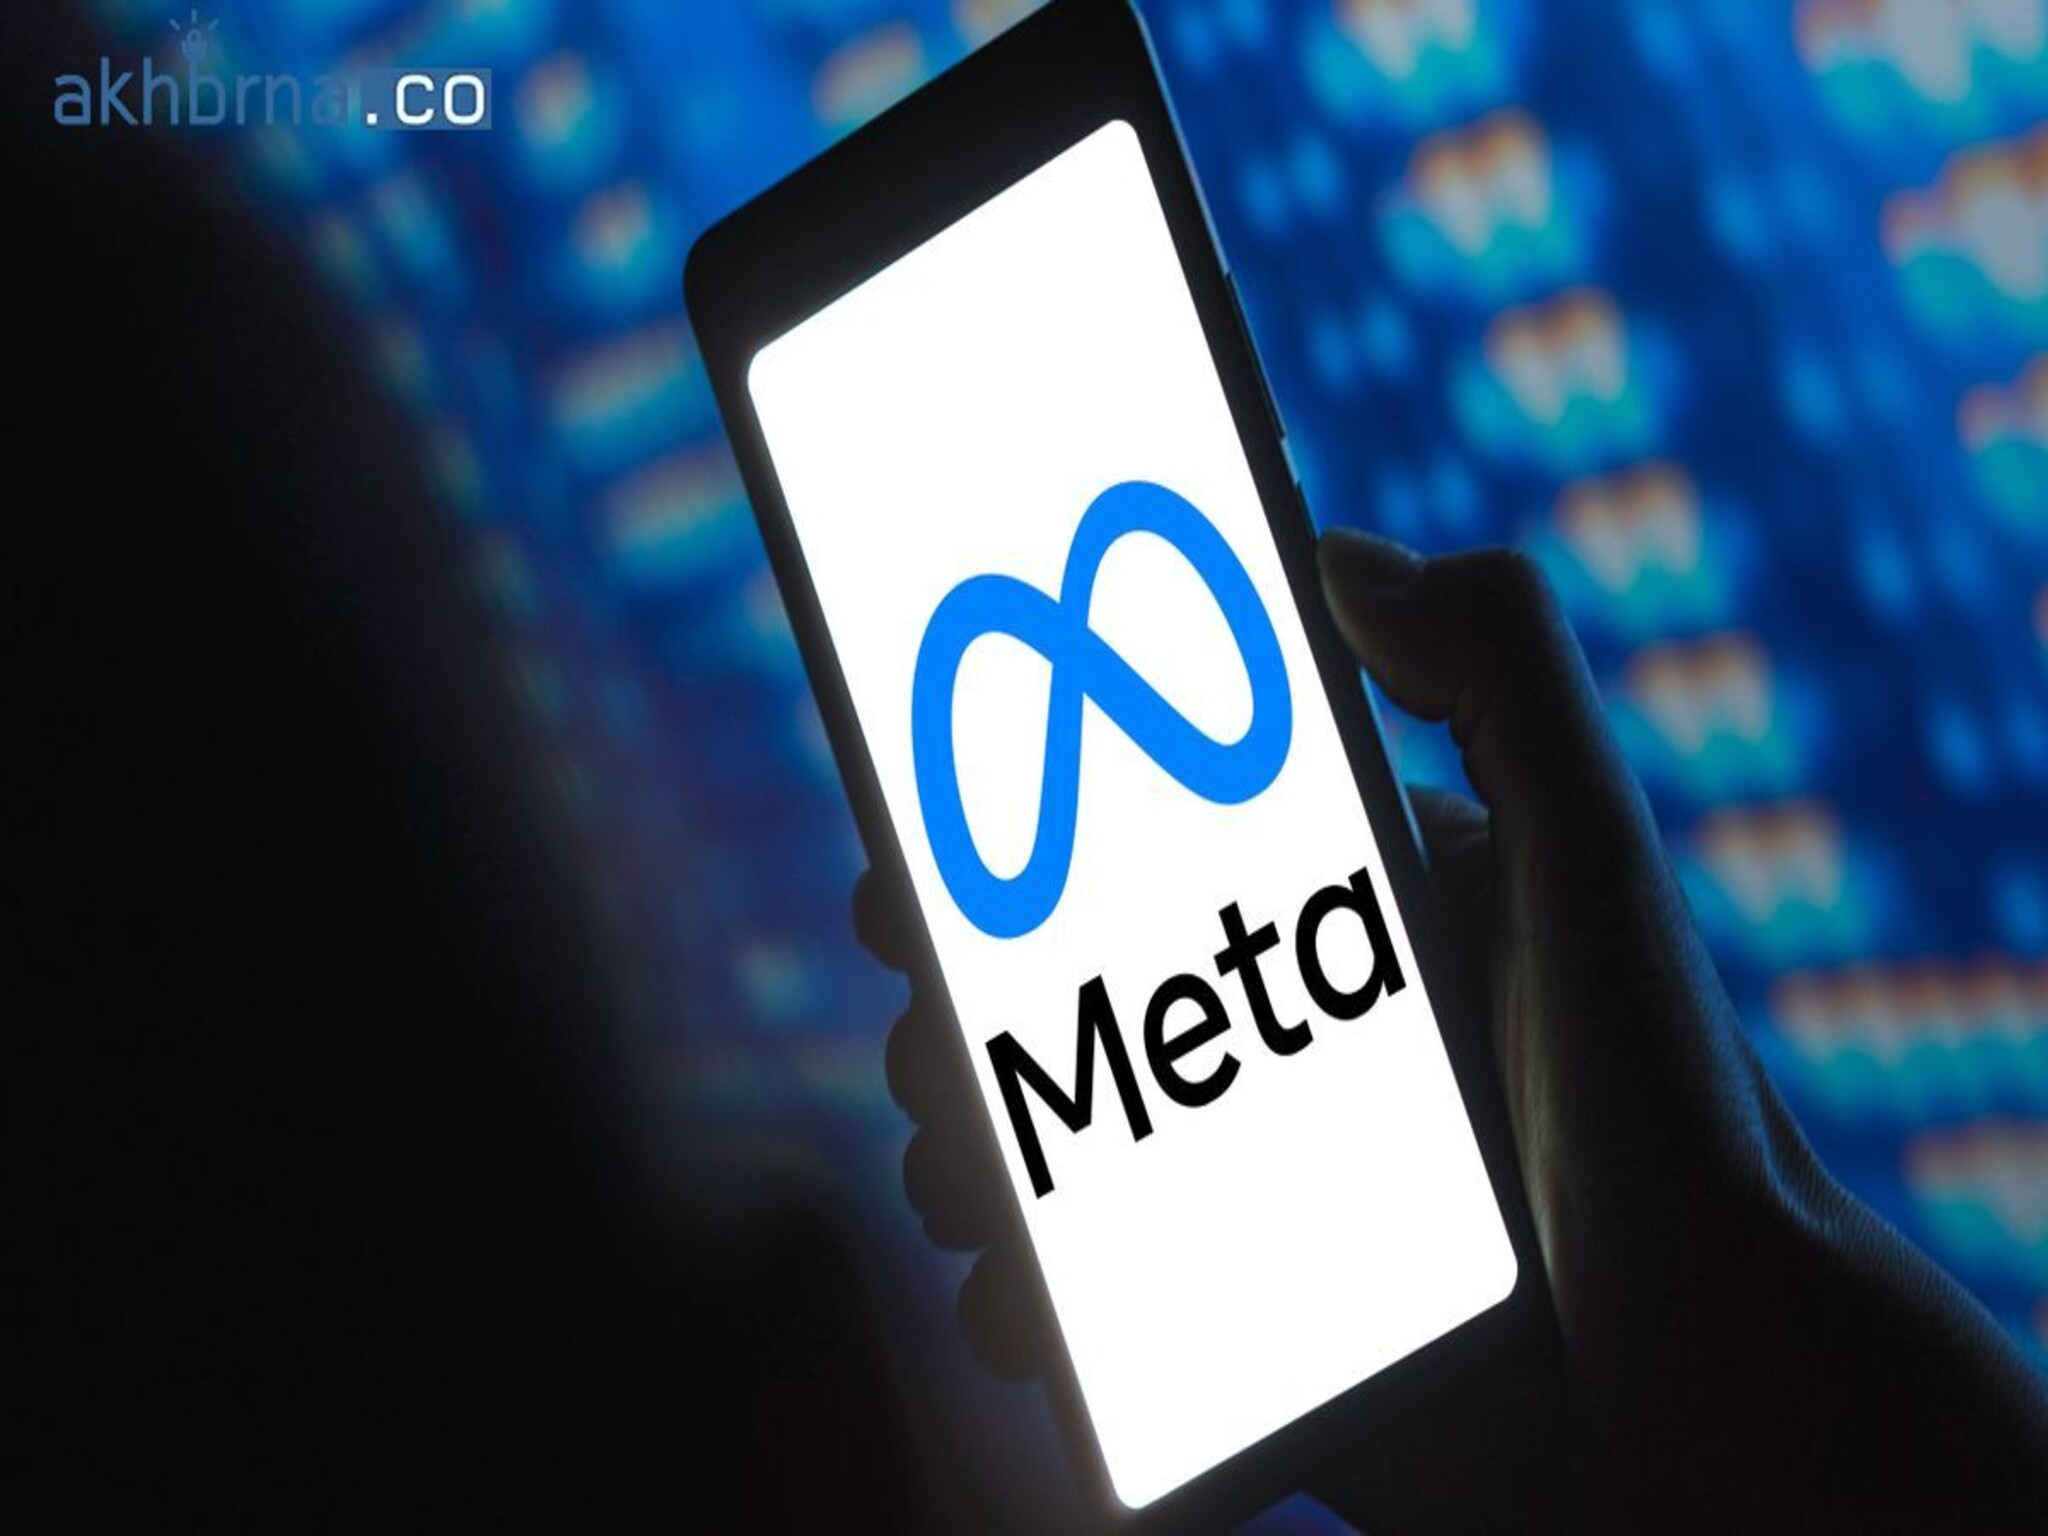 Meta plans to launch AI assistant in India with text and image capabilities